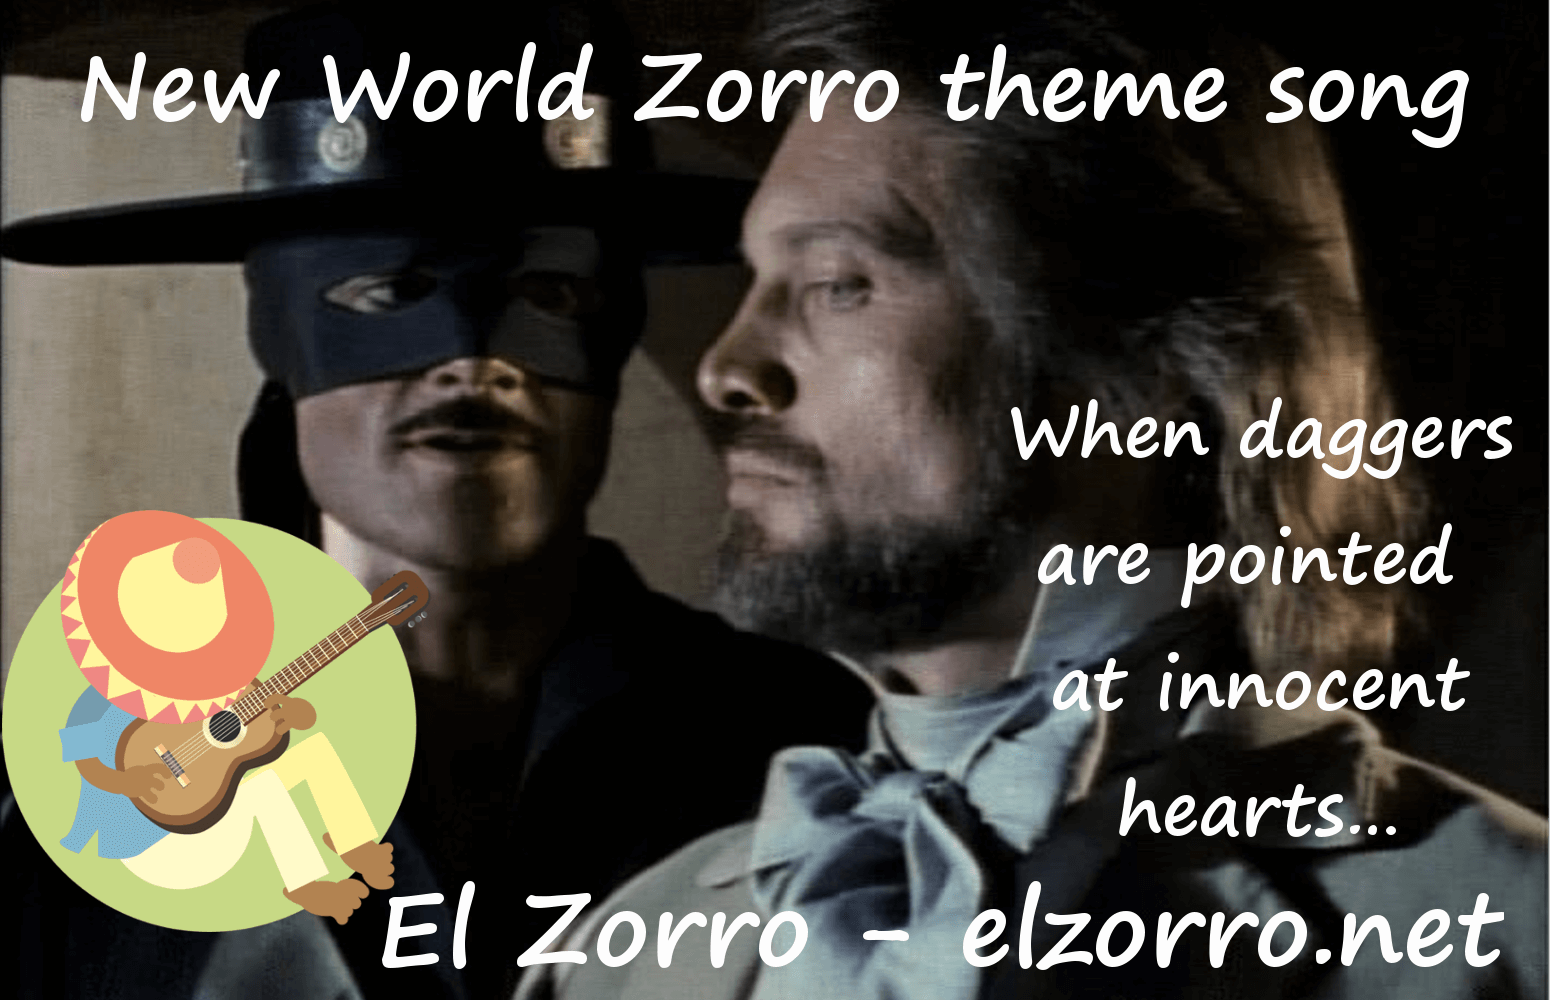 New World Zorro theme song When daggers are pointed at innocent hearts…